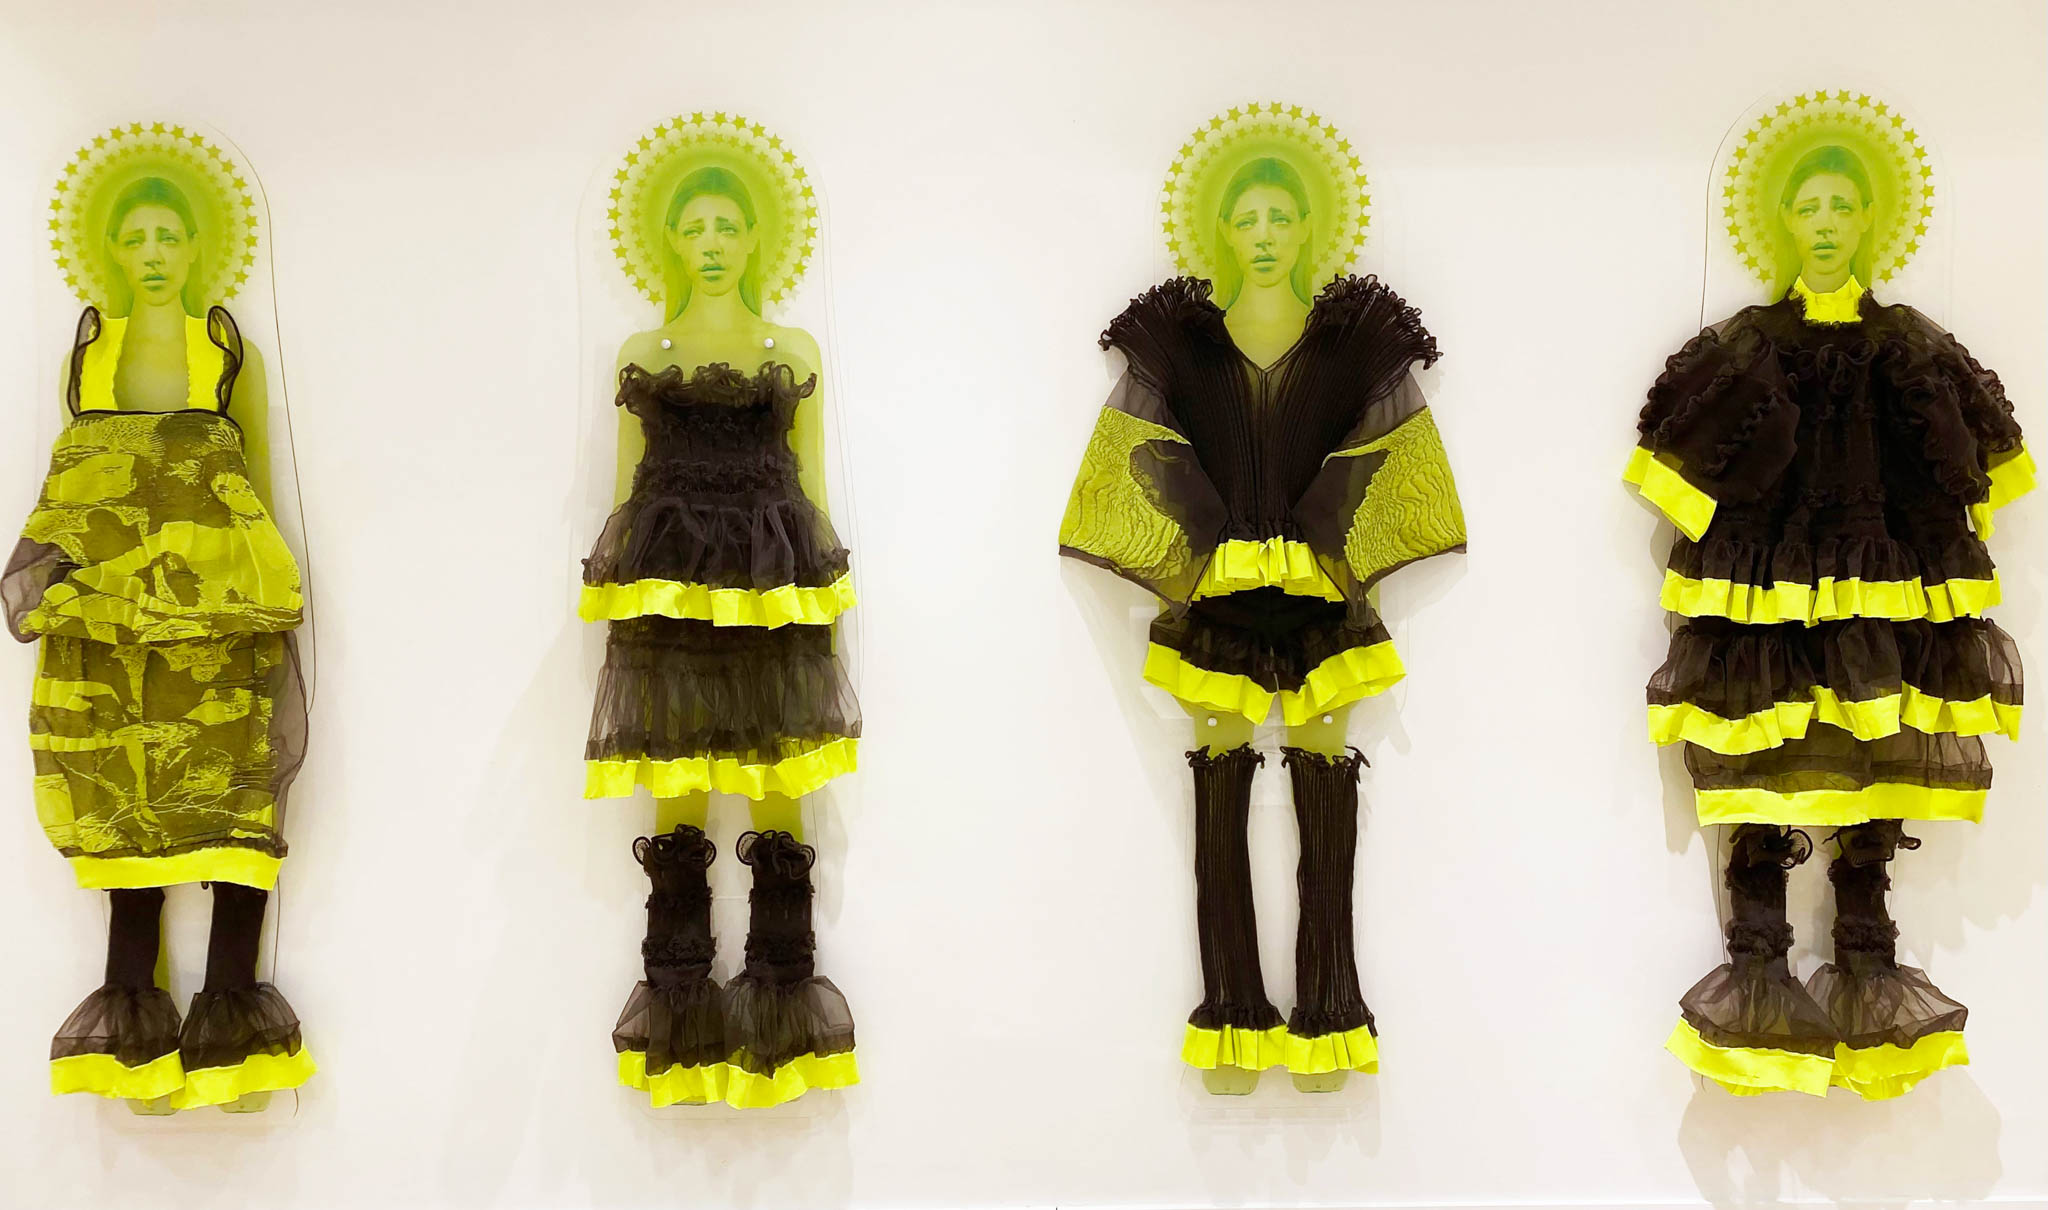 A series of 4 neon green printed women, each wearing different garments from the Veiling Veronicas series. Each neon printed women is mounted to a white wall as if they're floating.